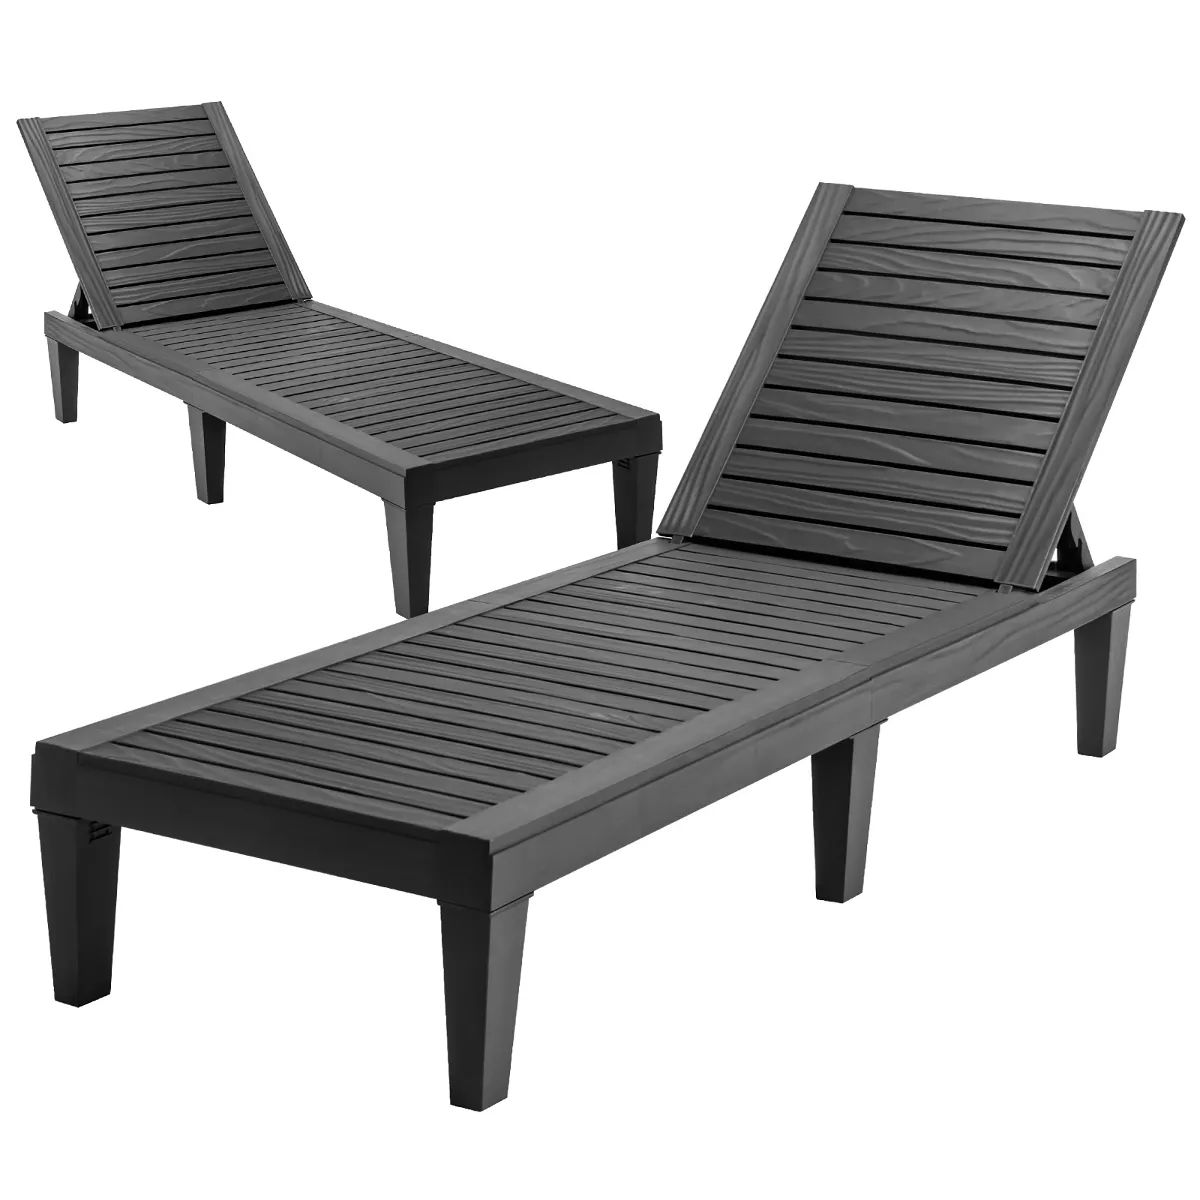 Costway 2 PCS Patio Lounge Chair Chaise Recliner Weather Resistant Adjust Brown\Black | Target